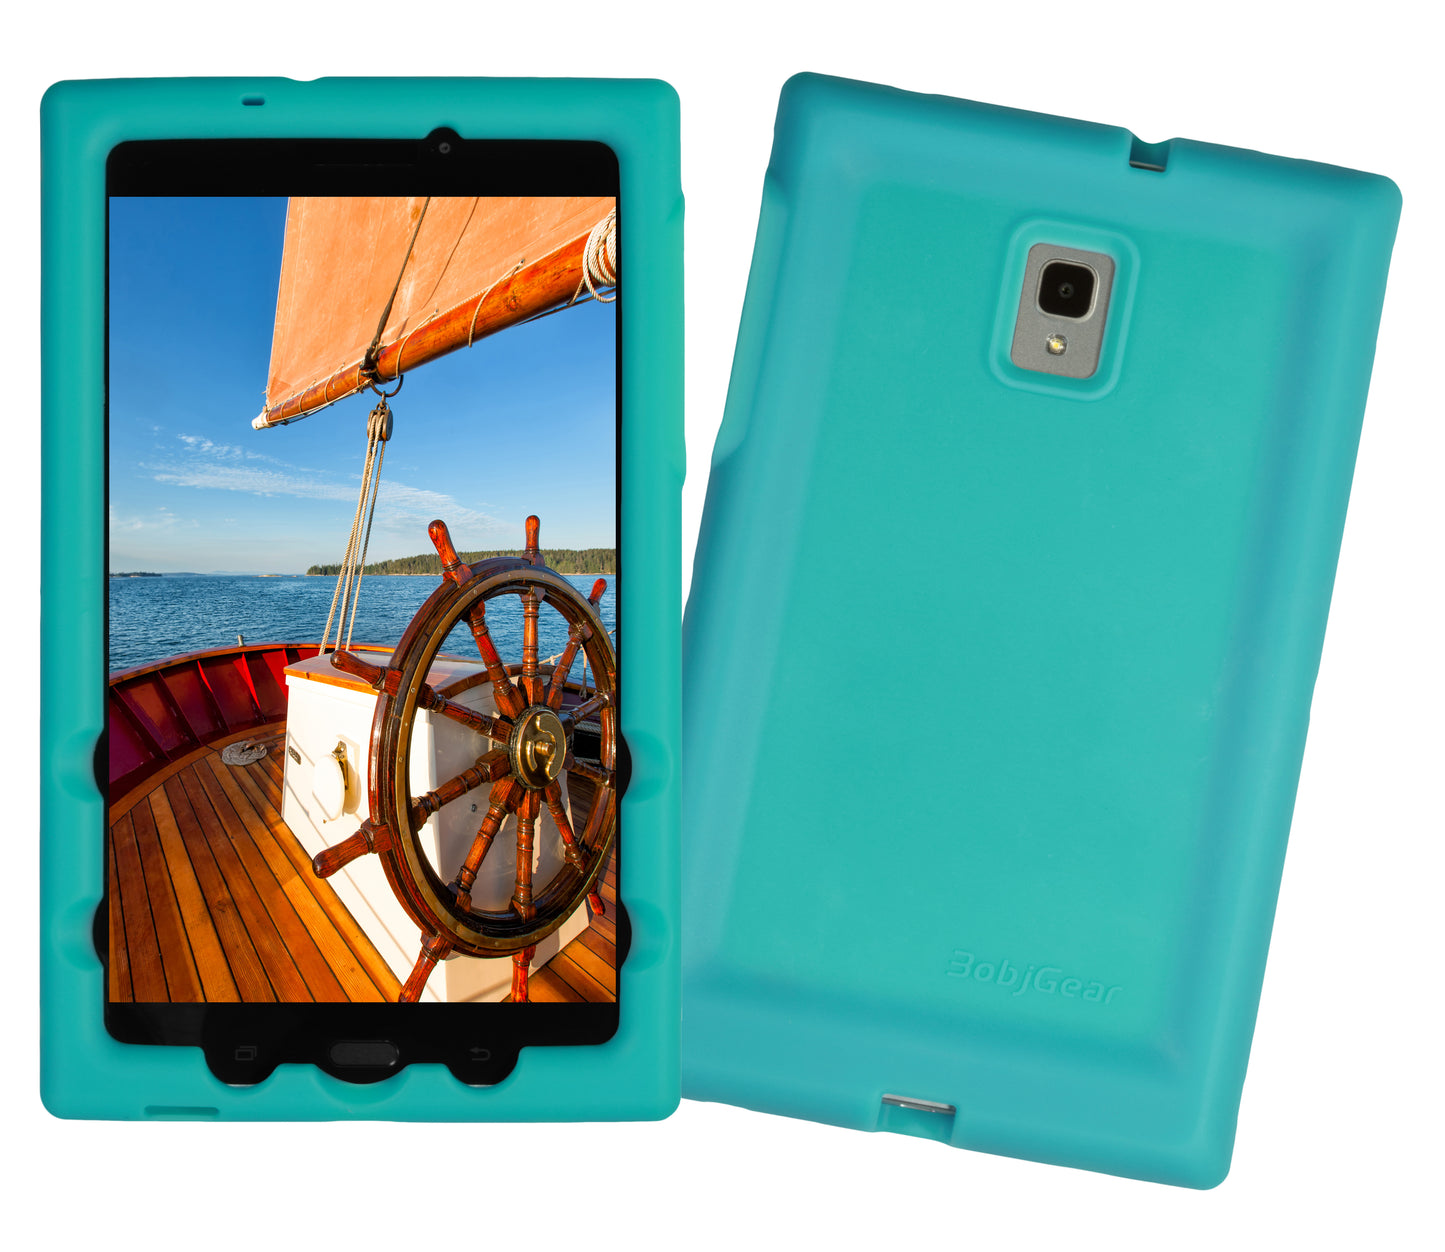 Bobj Rugged Tablet Case for Samsung Galaxy Tab A 8.0 (2017)  Model SM-T380 - Terrific Turquoise